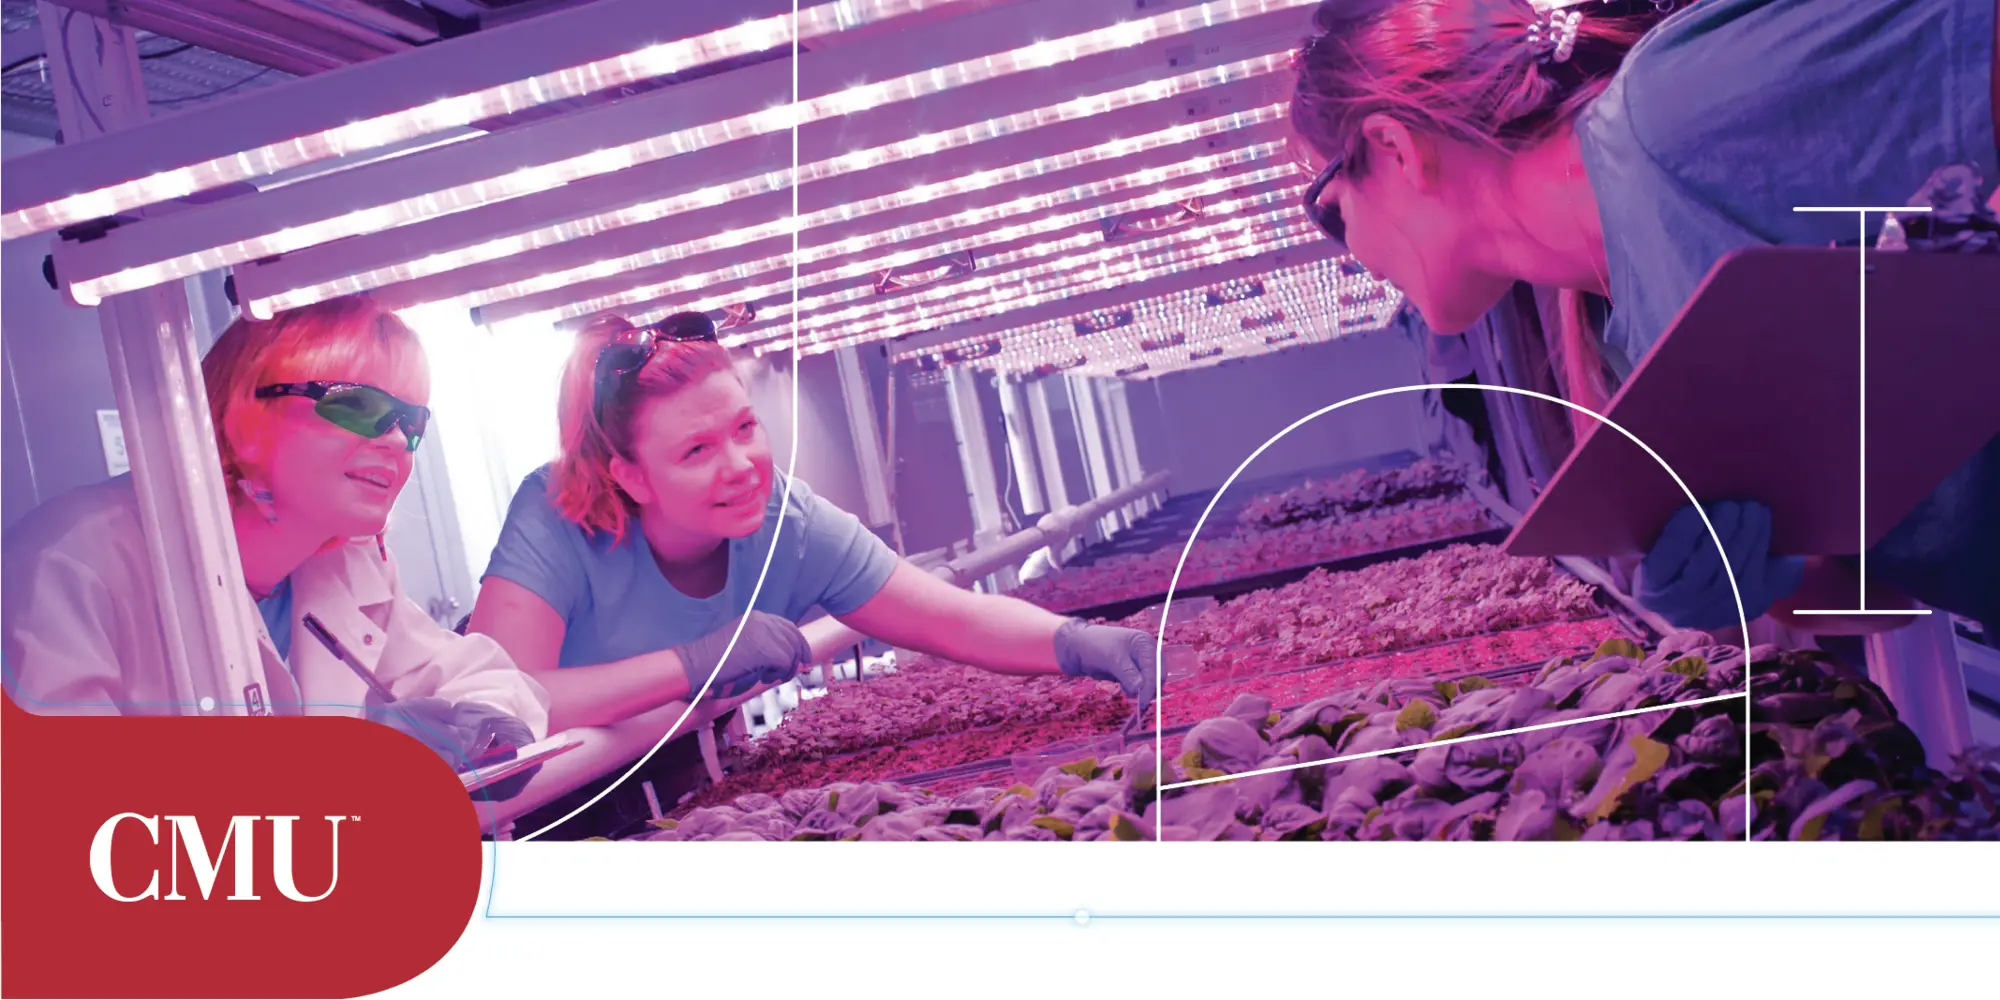 Leveraging AI to grow healthy and nutritious food.